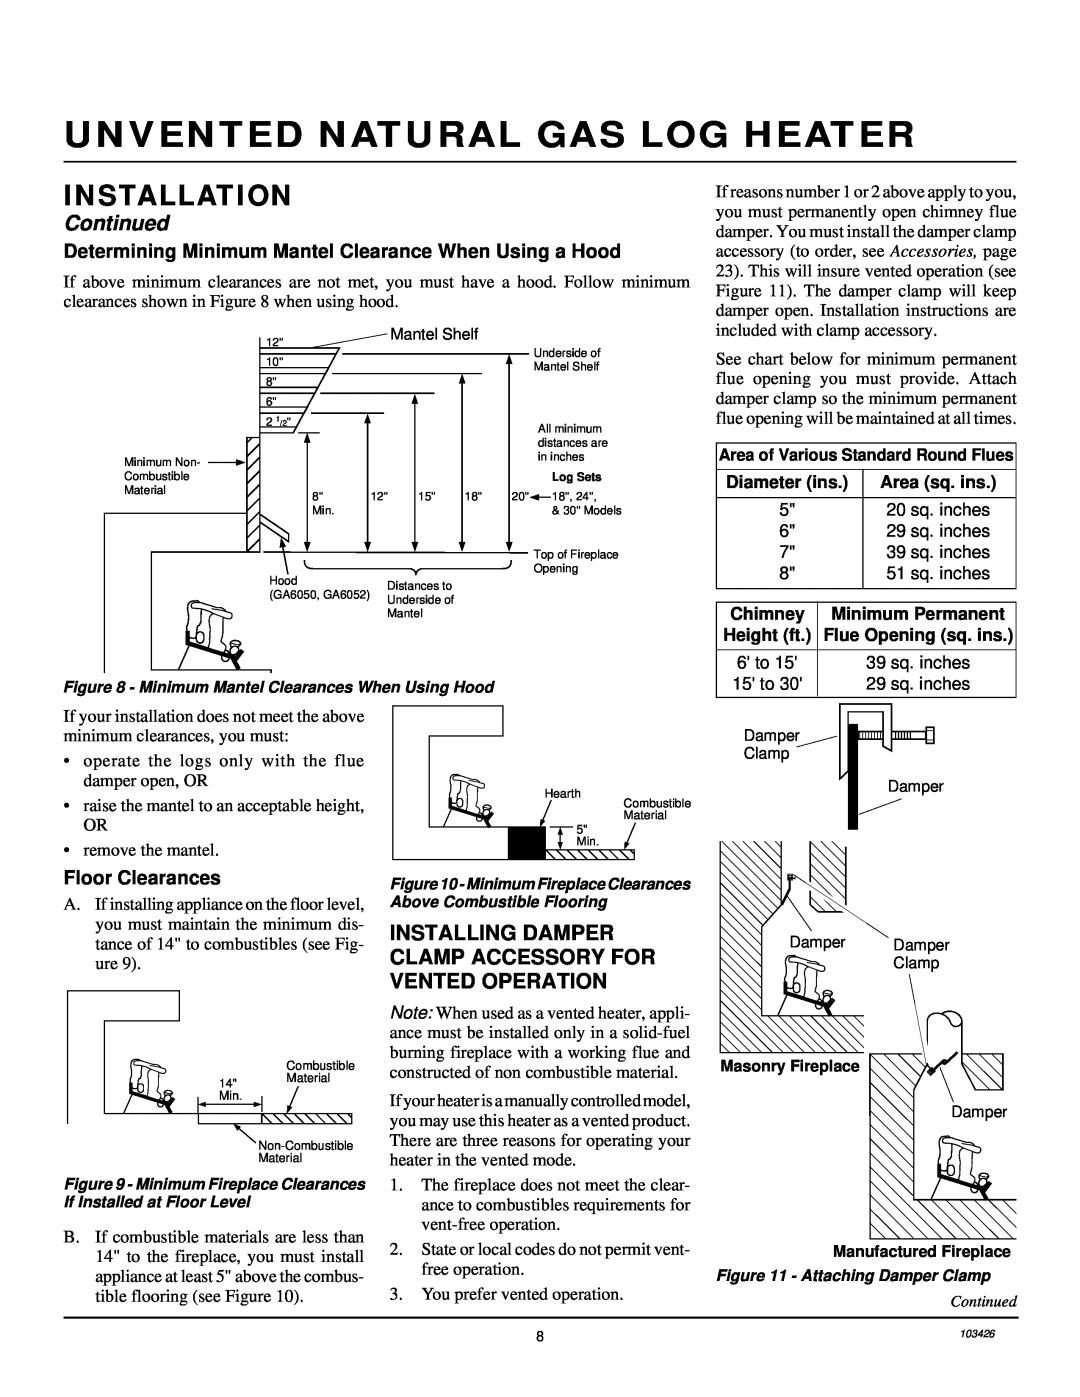 Desa 103426-01 installation manual Floor Clearances, Unvented Natural Gas Log Heater, Installation, Continued 